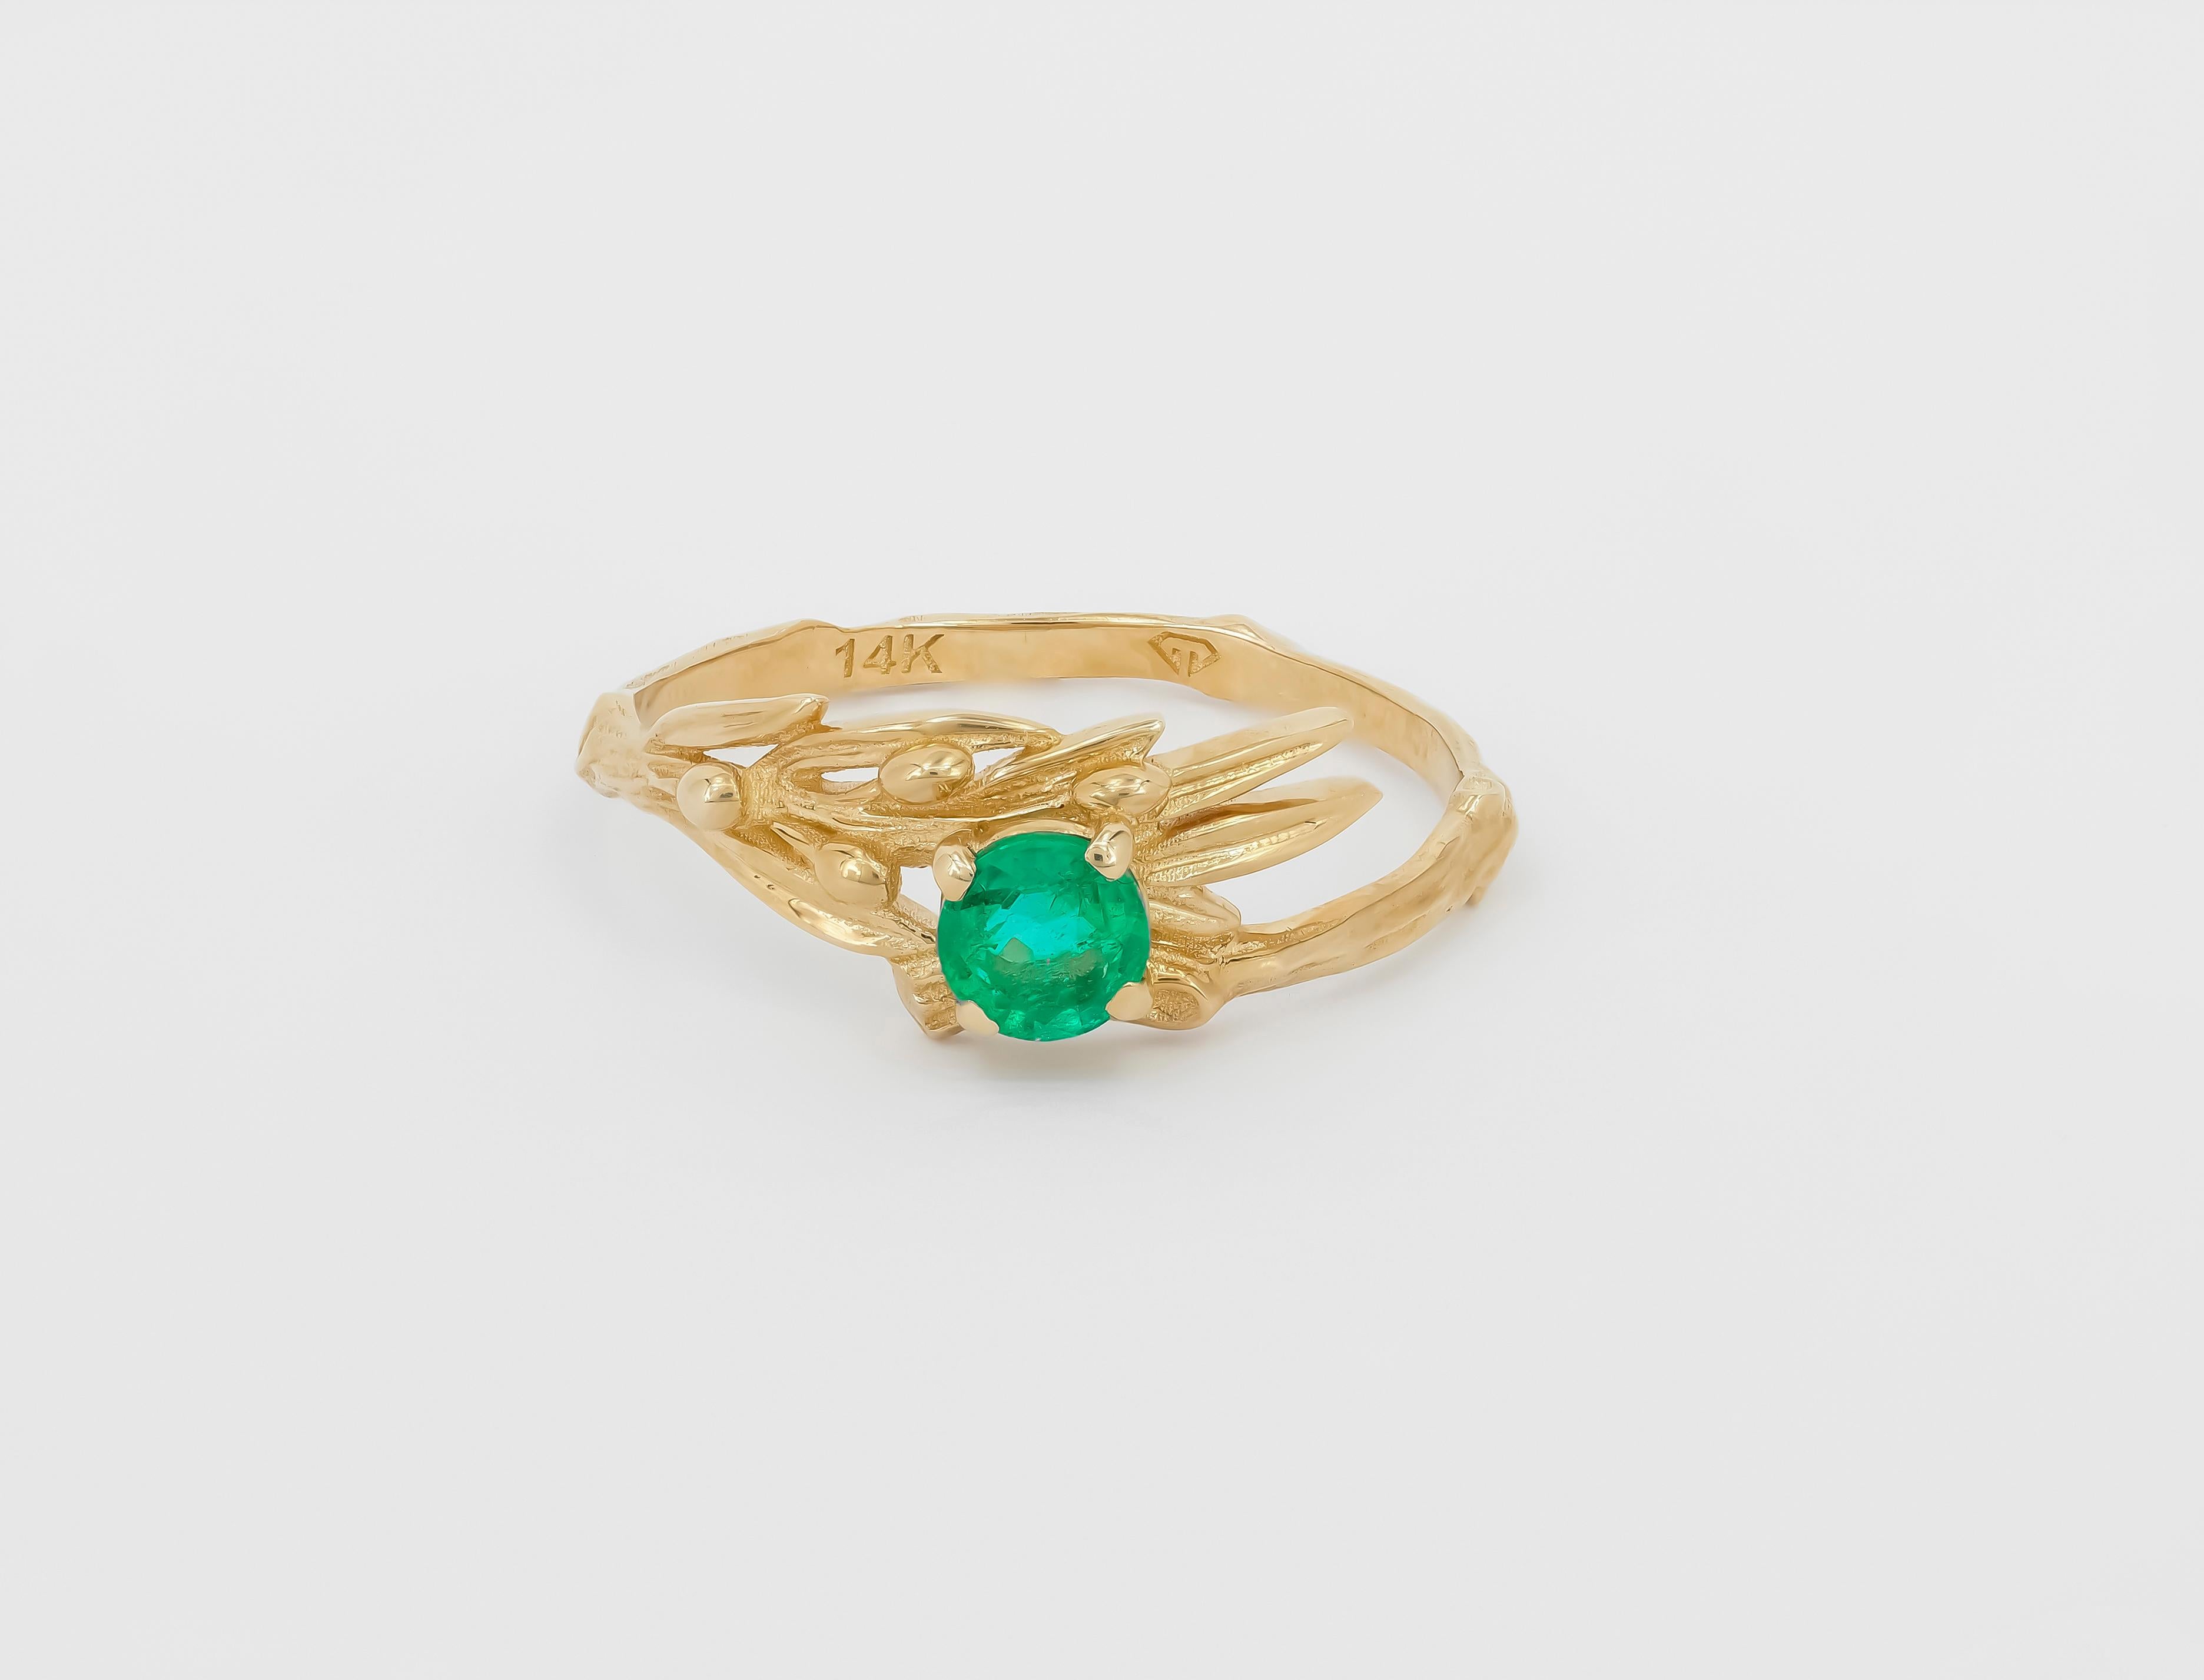 14 kt solid gold ring with natural emerald. May birthstone. Olive tree design yellow gold ring with emerald.
Weight approx. 1.70 g.

Central stone: Natural emerald
Cut: Round
Weight: approx 0.55 ct.
Color: Green
Clarity: Transparent with